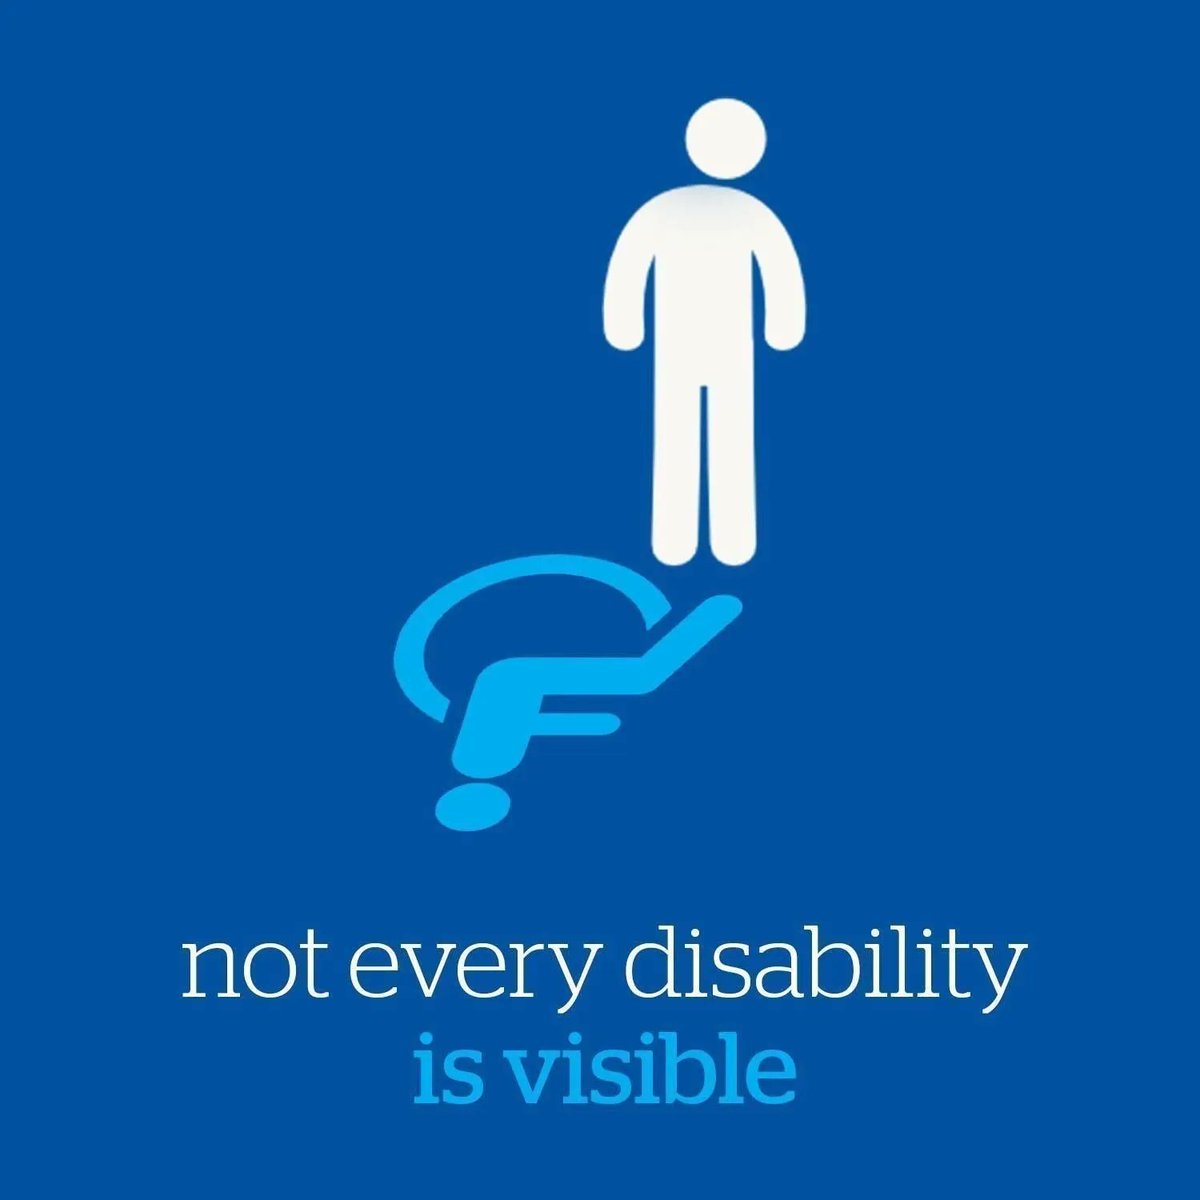 “”You don’t look disabled.” The #diversity of #disability goes so far beyond the popular representations of it… regardless of how visible or invisible…we are all what disabled “looks like.”” buff.ly/2ZZRpoQ @coffeespoonie #DisabilityVisibility #DisabilityTwitter